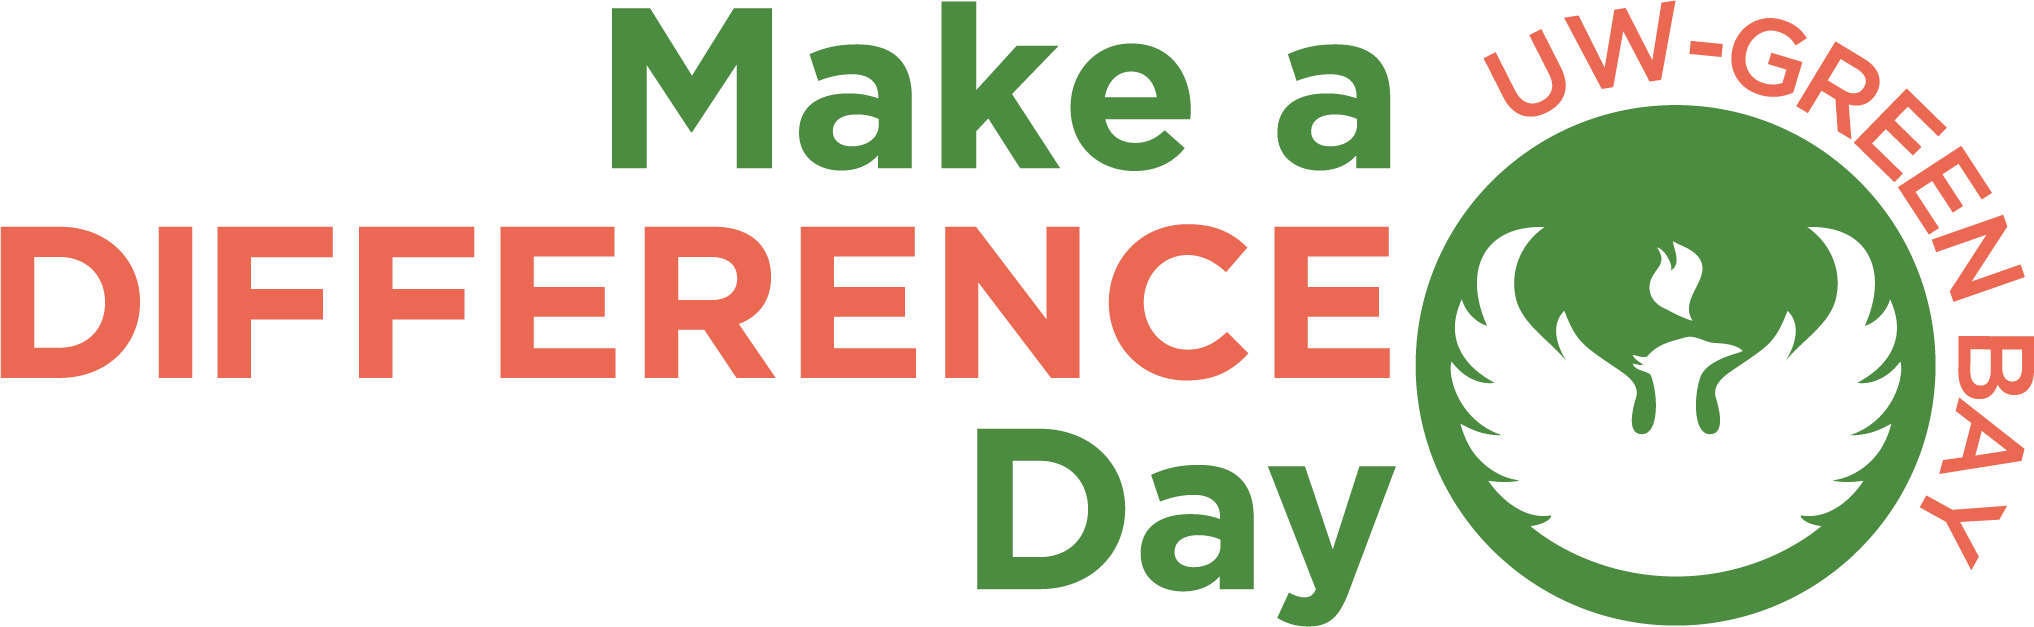 Make a Difference Day graphic